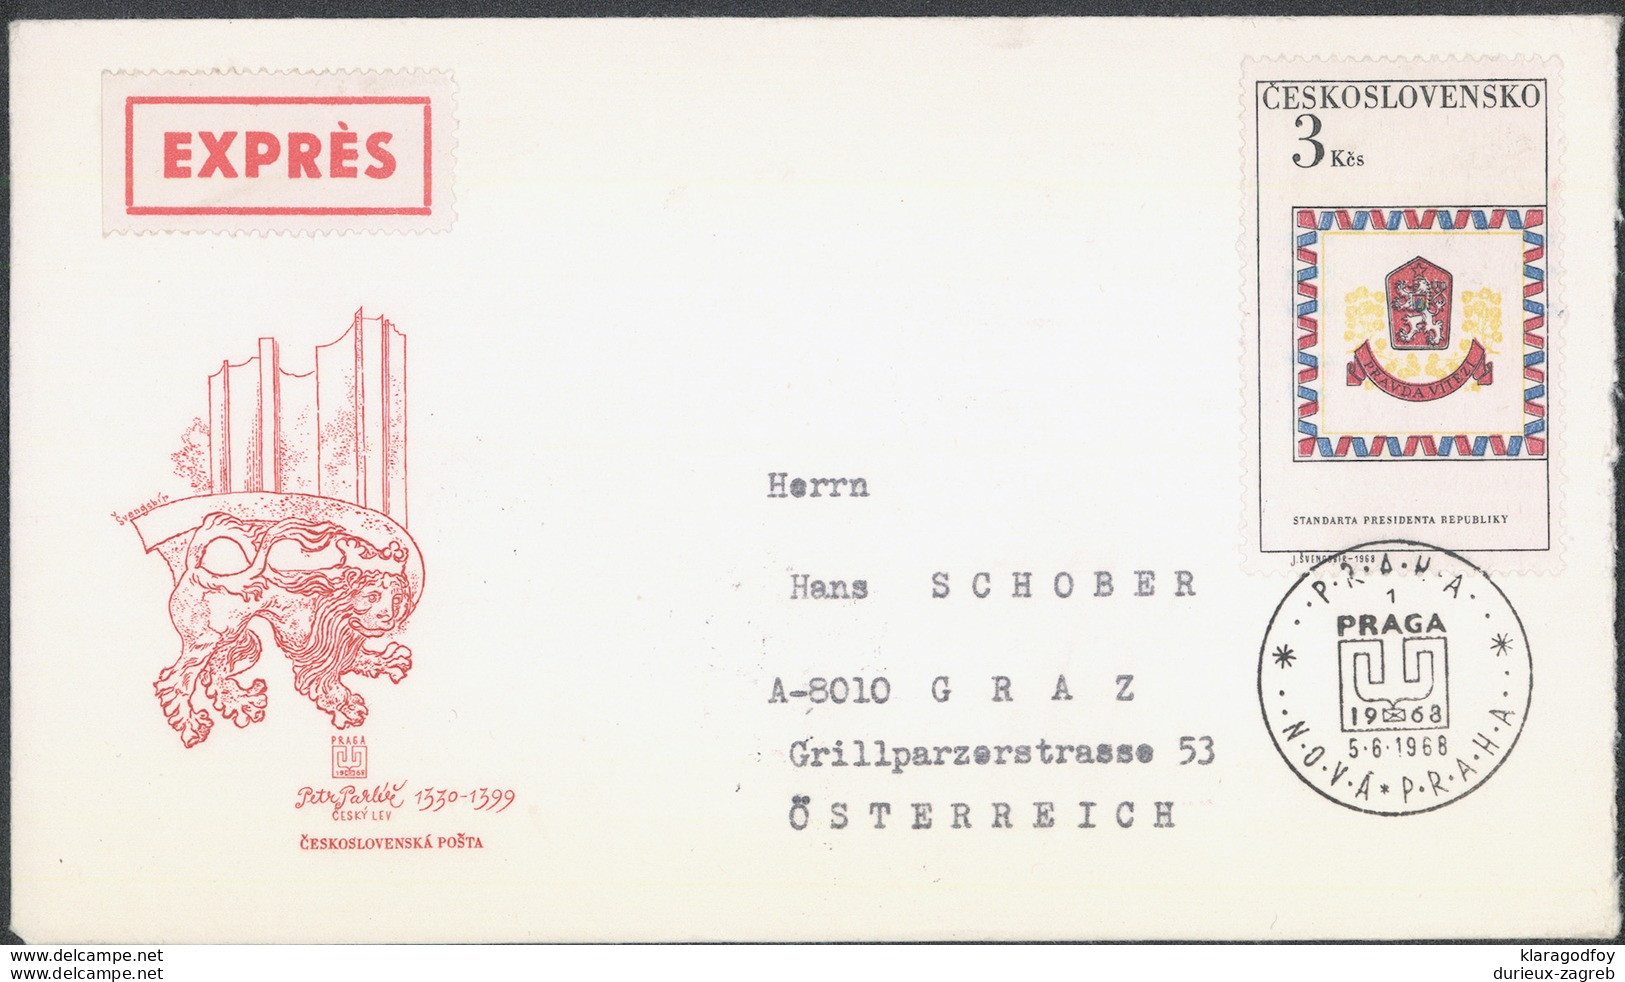 Czechoslovakia, Petr Parlé&#x159; Illustrated Letter Cover Express Travelled 1968 Karlovy Vary To Graz B170410 - Covers & Documents